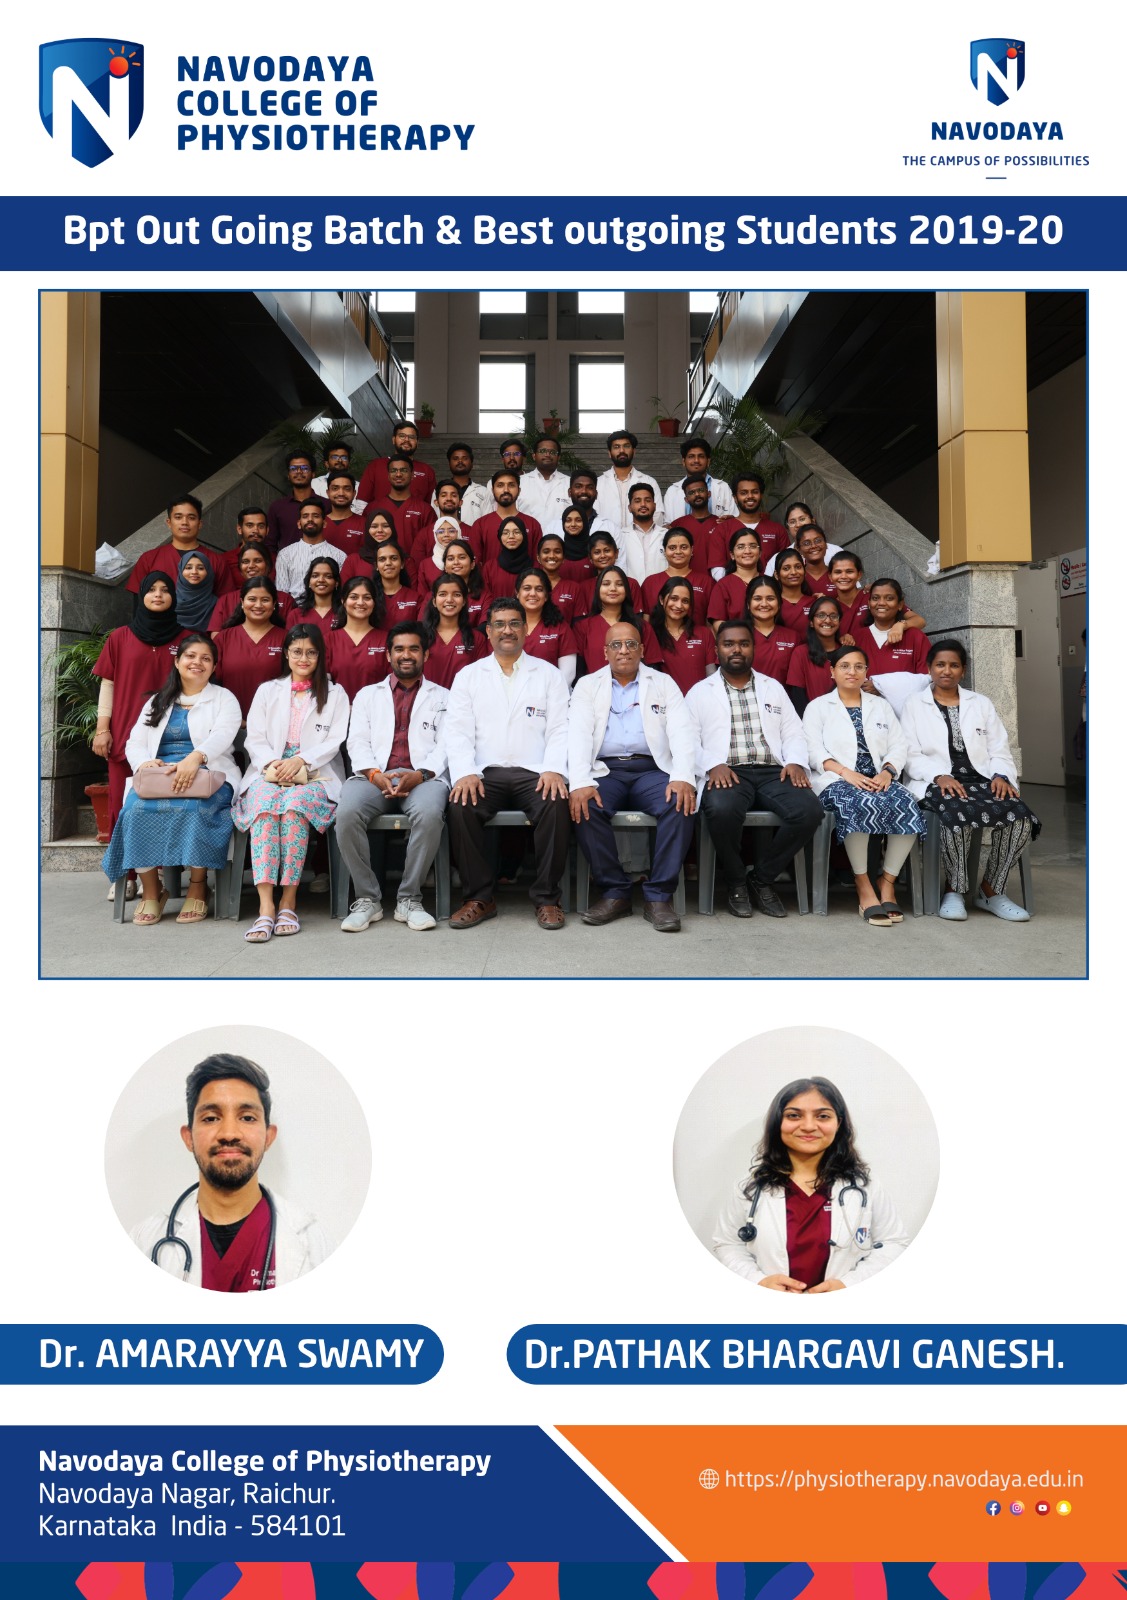 Bpt out going batch & best outgoing students 2019-20